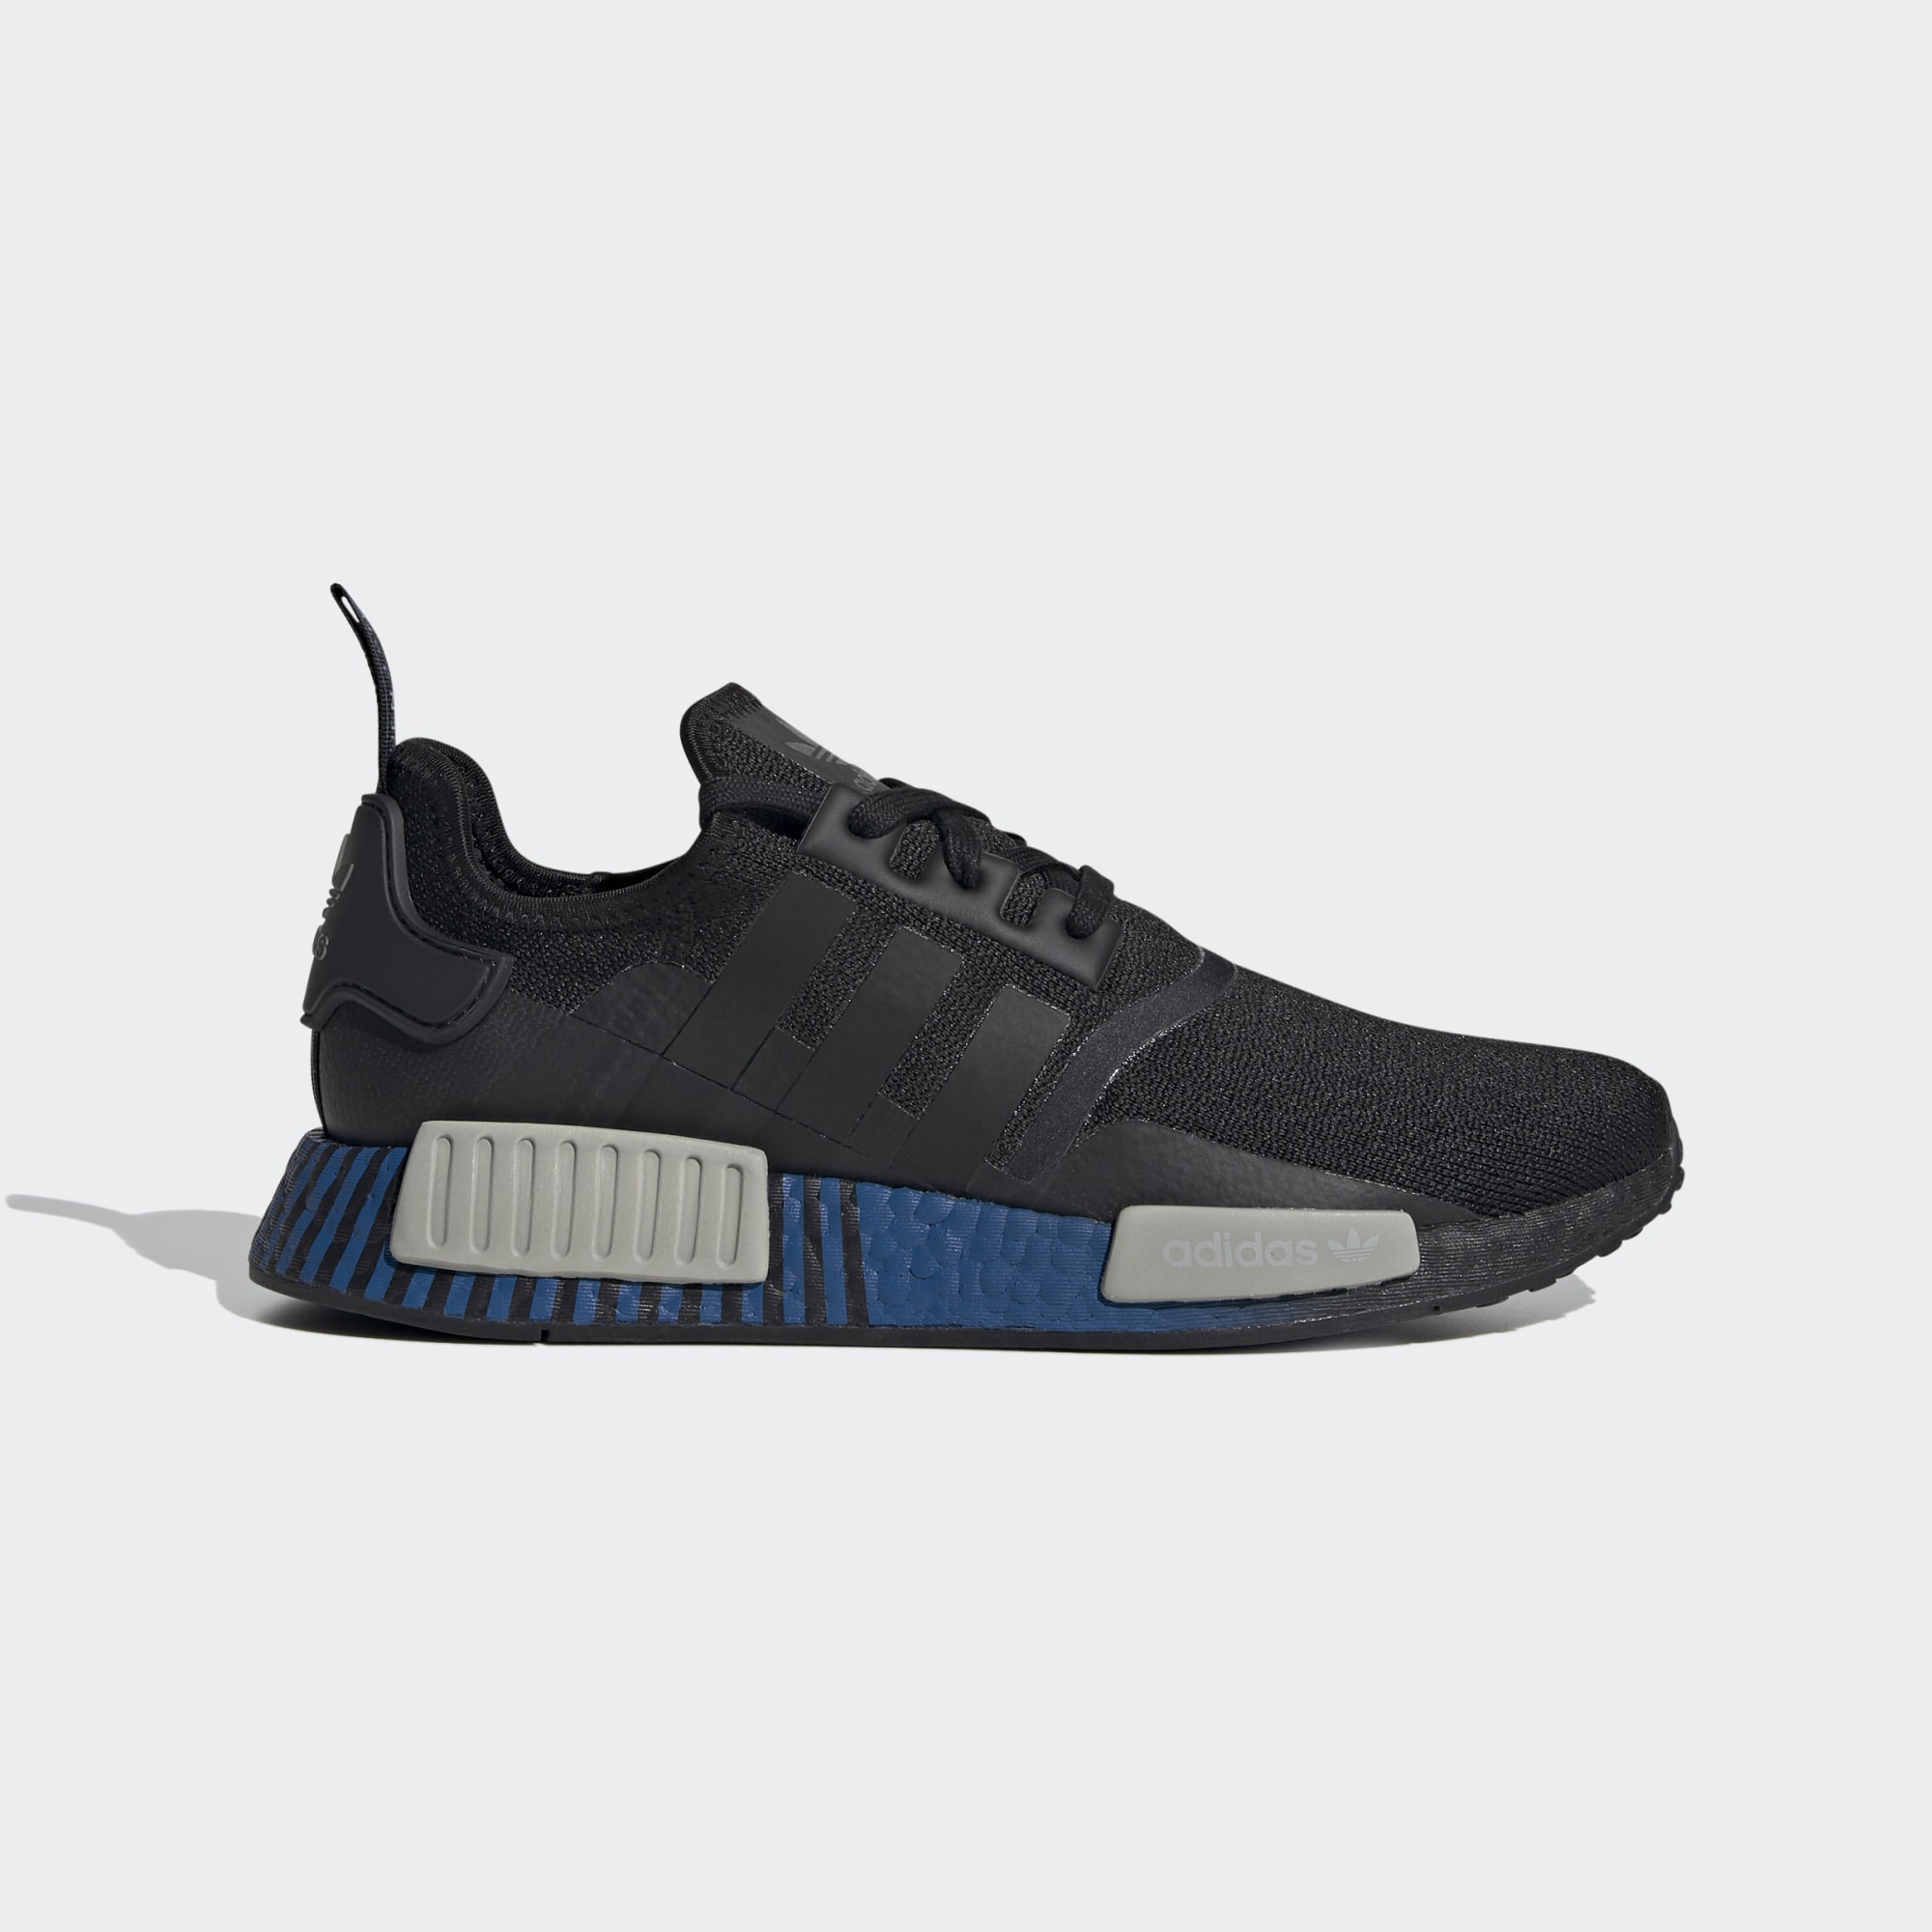 nmd_r1 boost